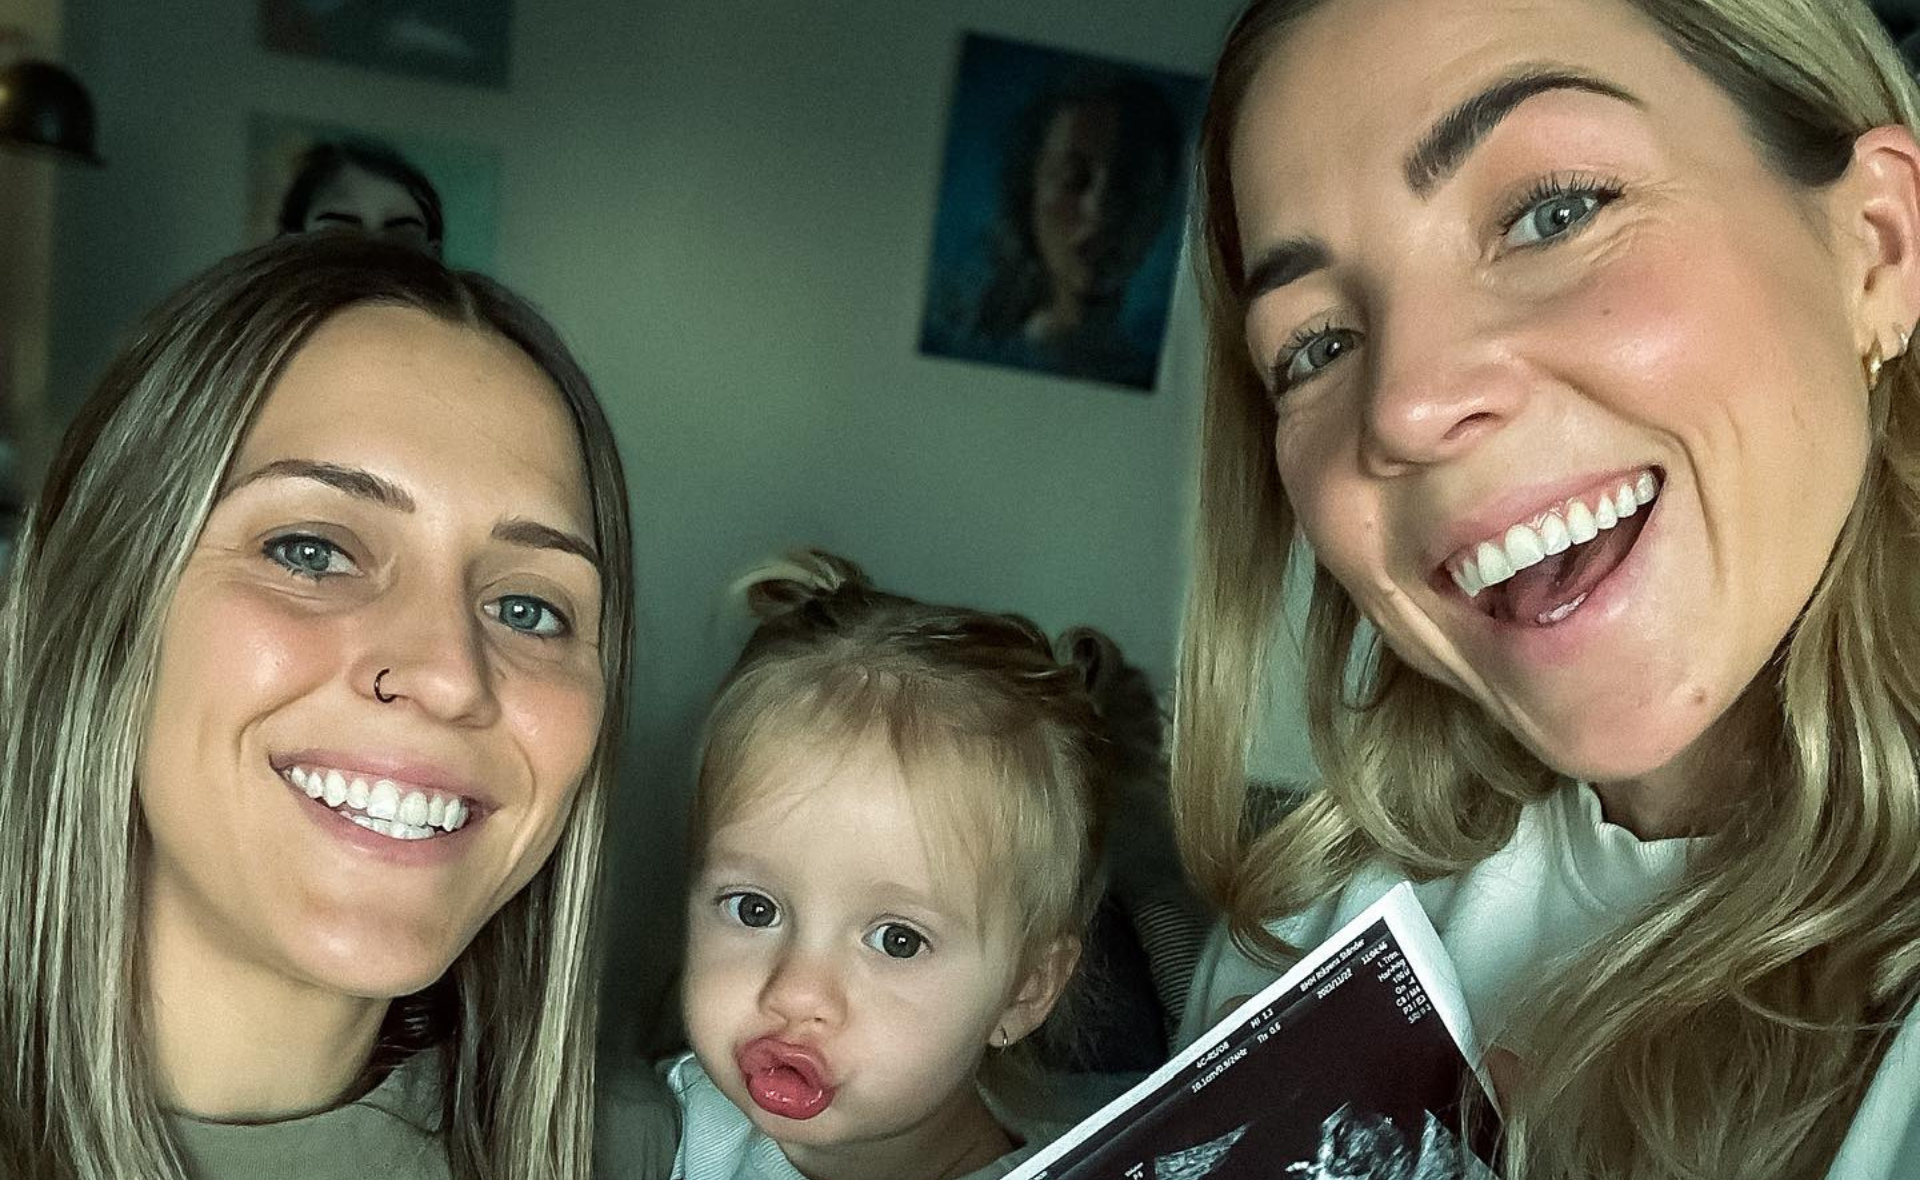 Matildas star Katrina Gorry reveals the gender of her second baby with Clara Markstedt